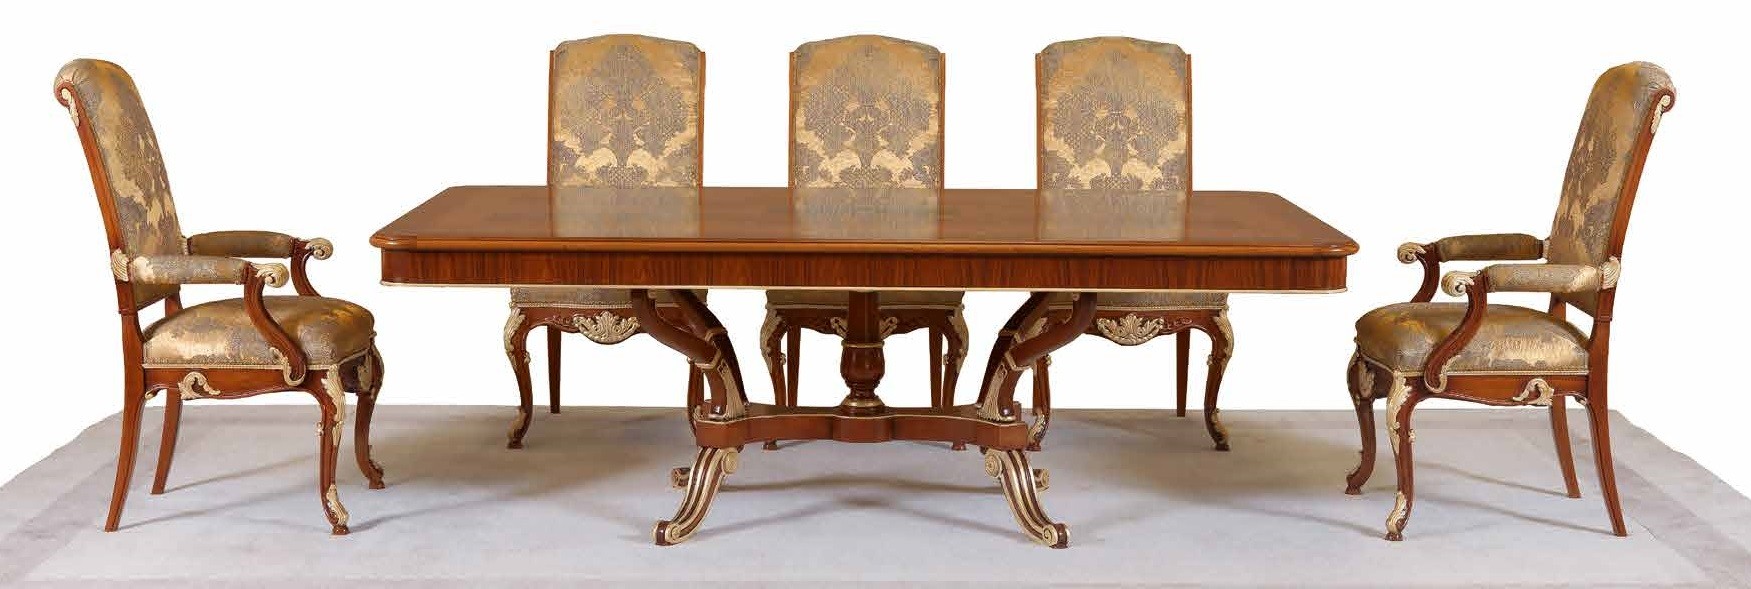 DINING ROOM FURNITURE Stunning Golden like the Sun Dining Table Furniture Set